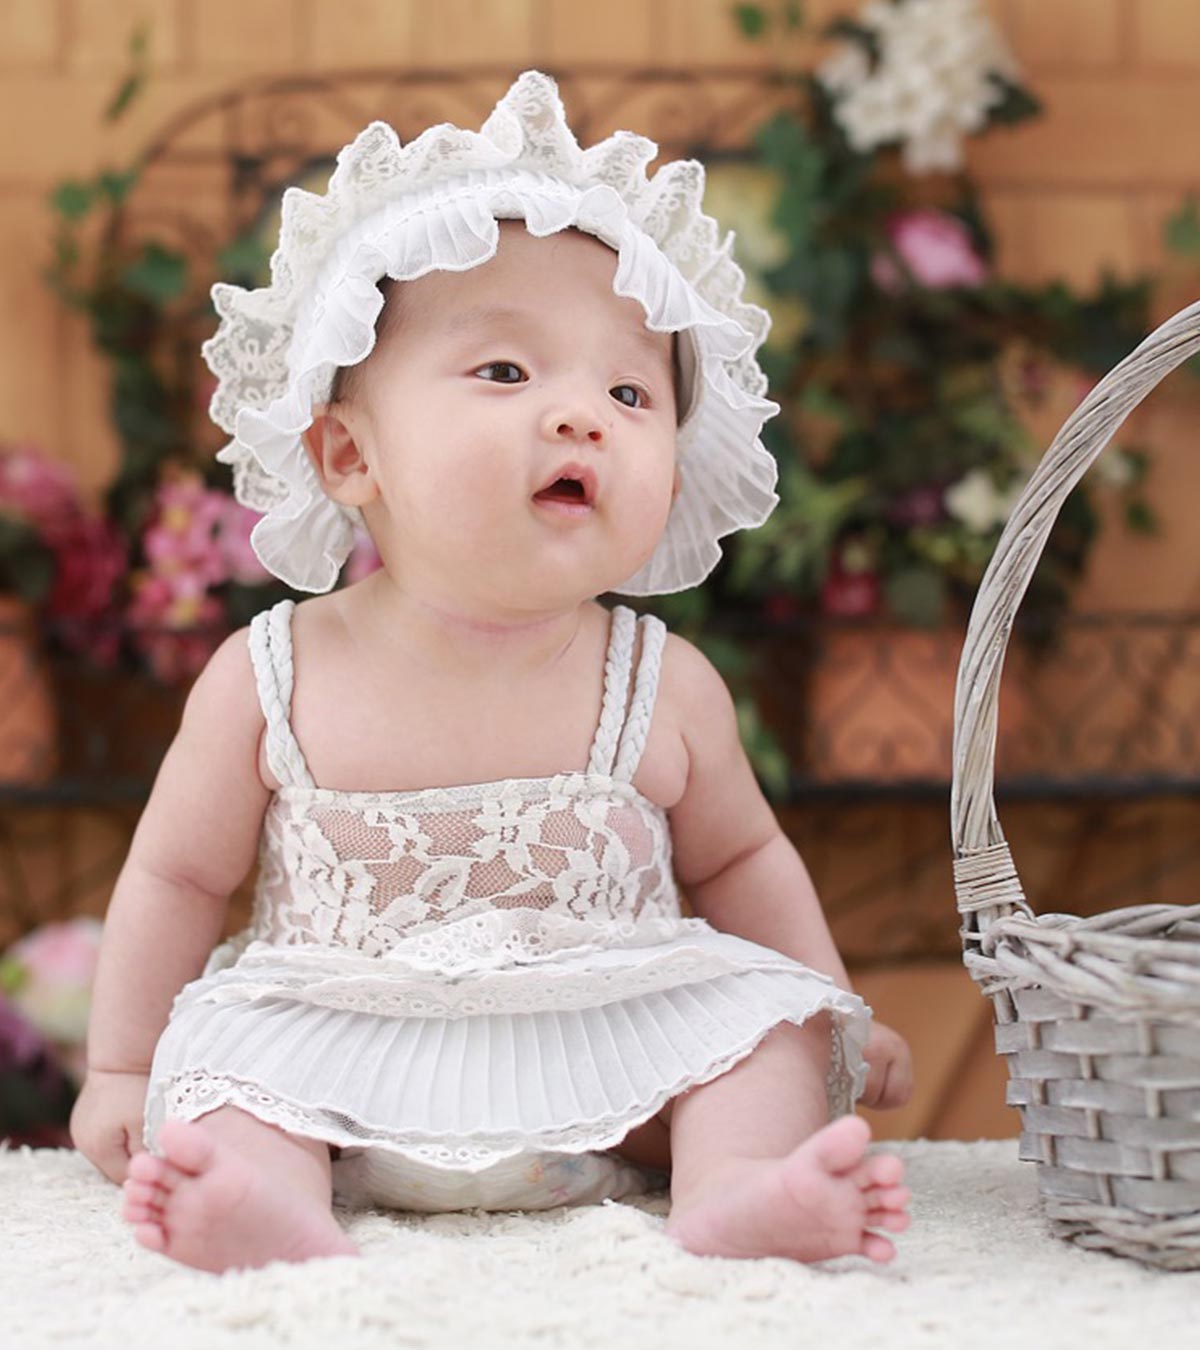 55 Most Popular Chilean Baby Names for Girls and Boys